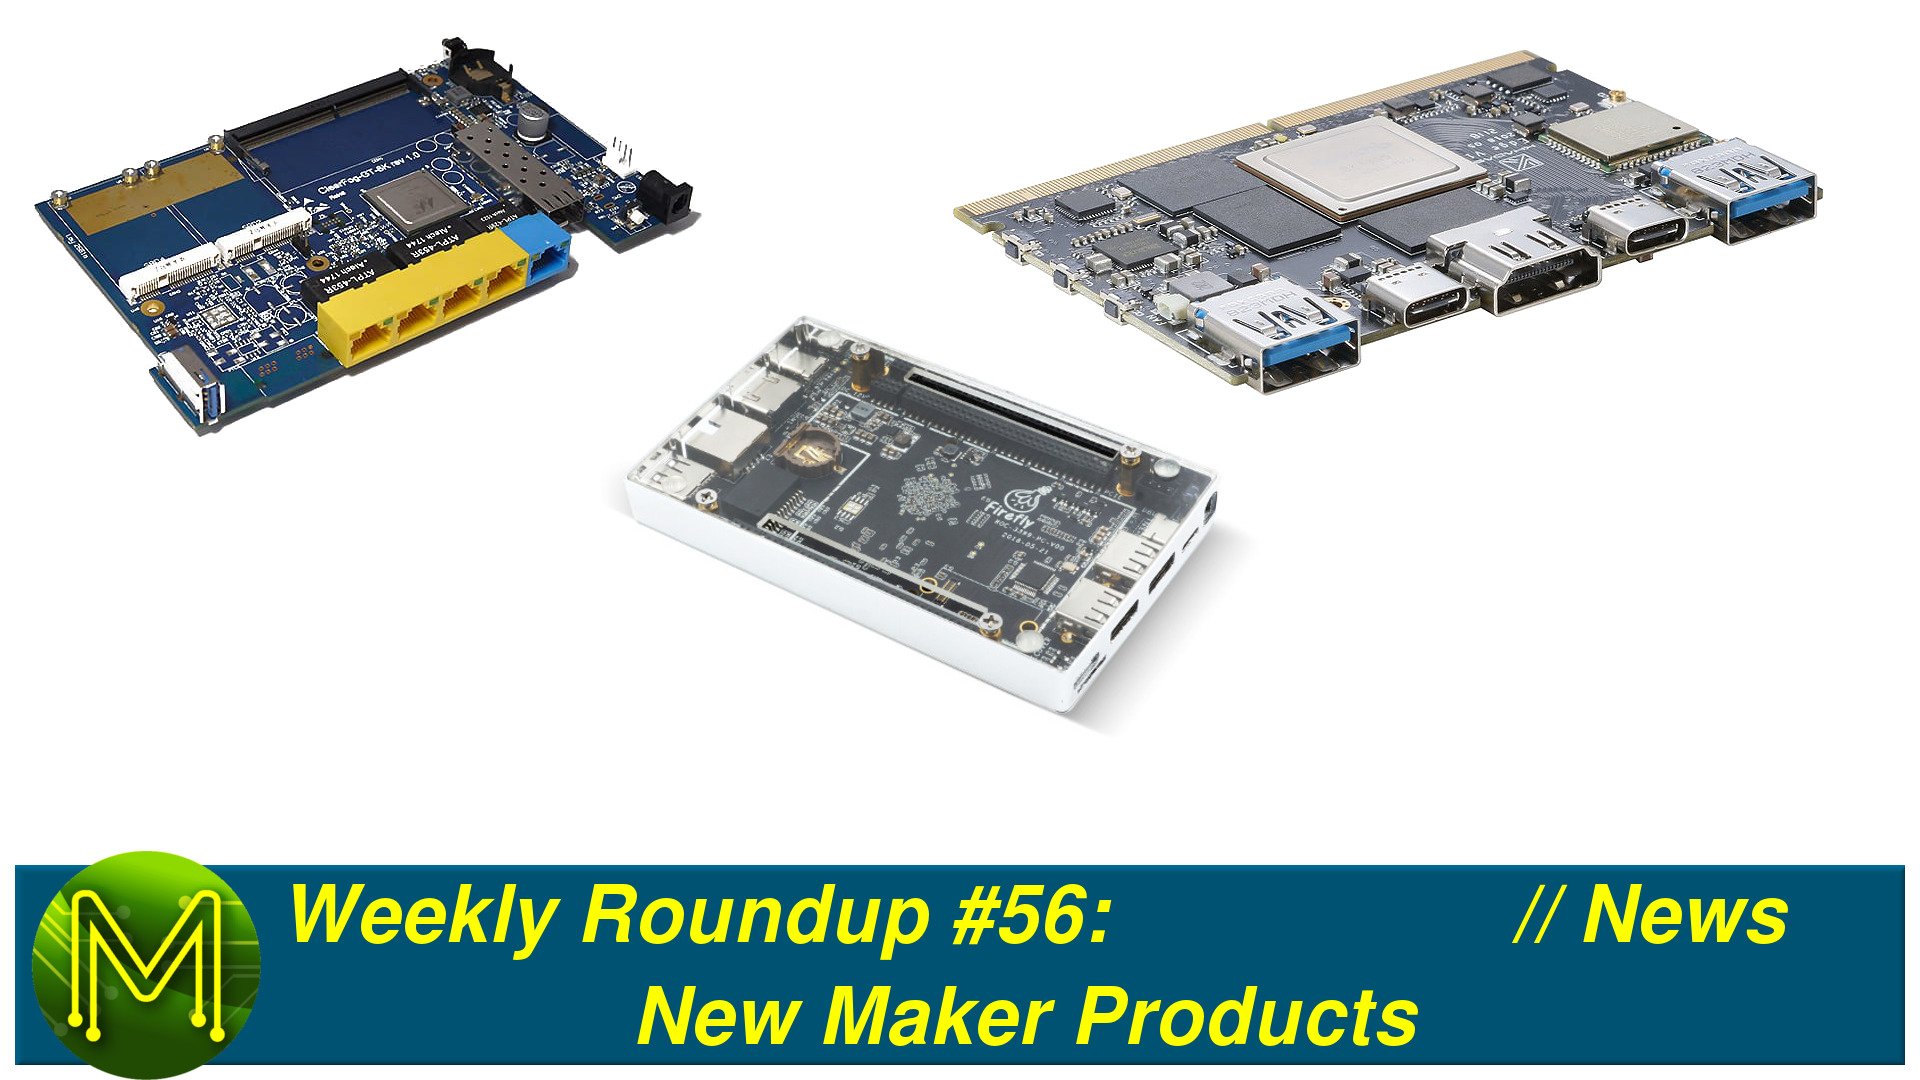 Weekly Roundup #56: New Maker Products // News